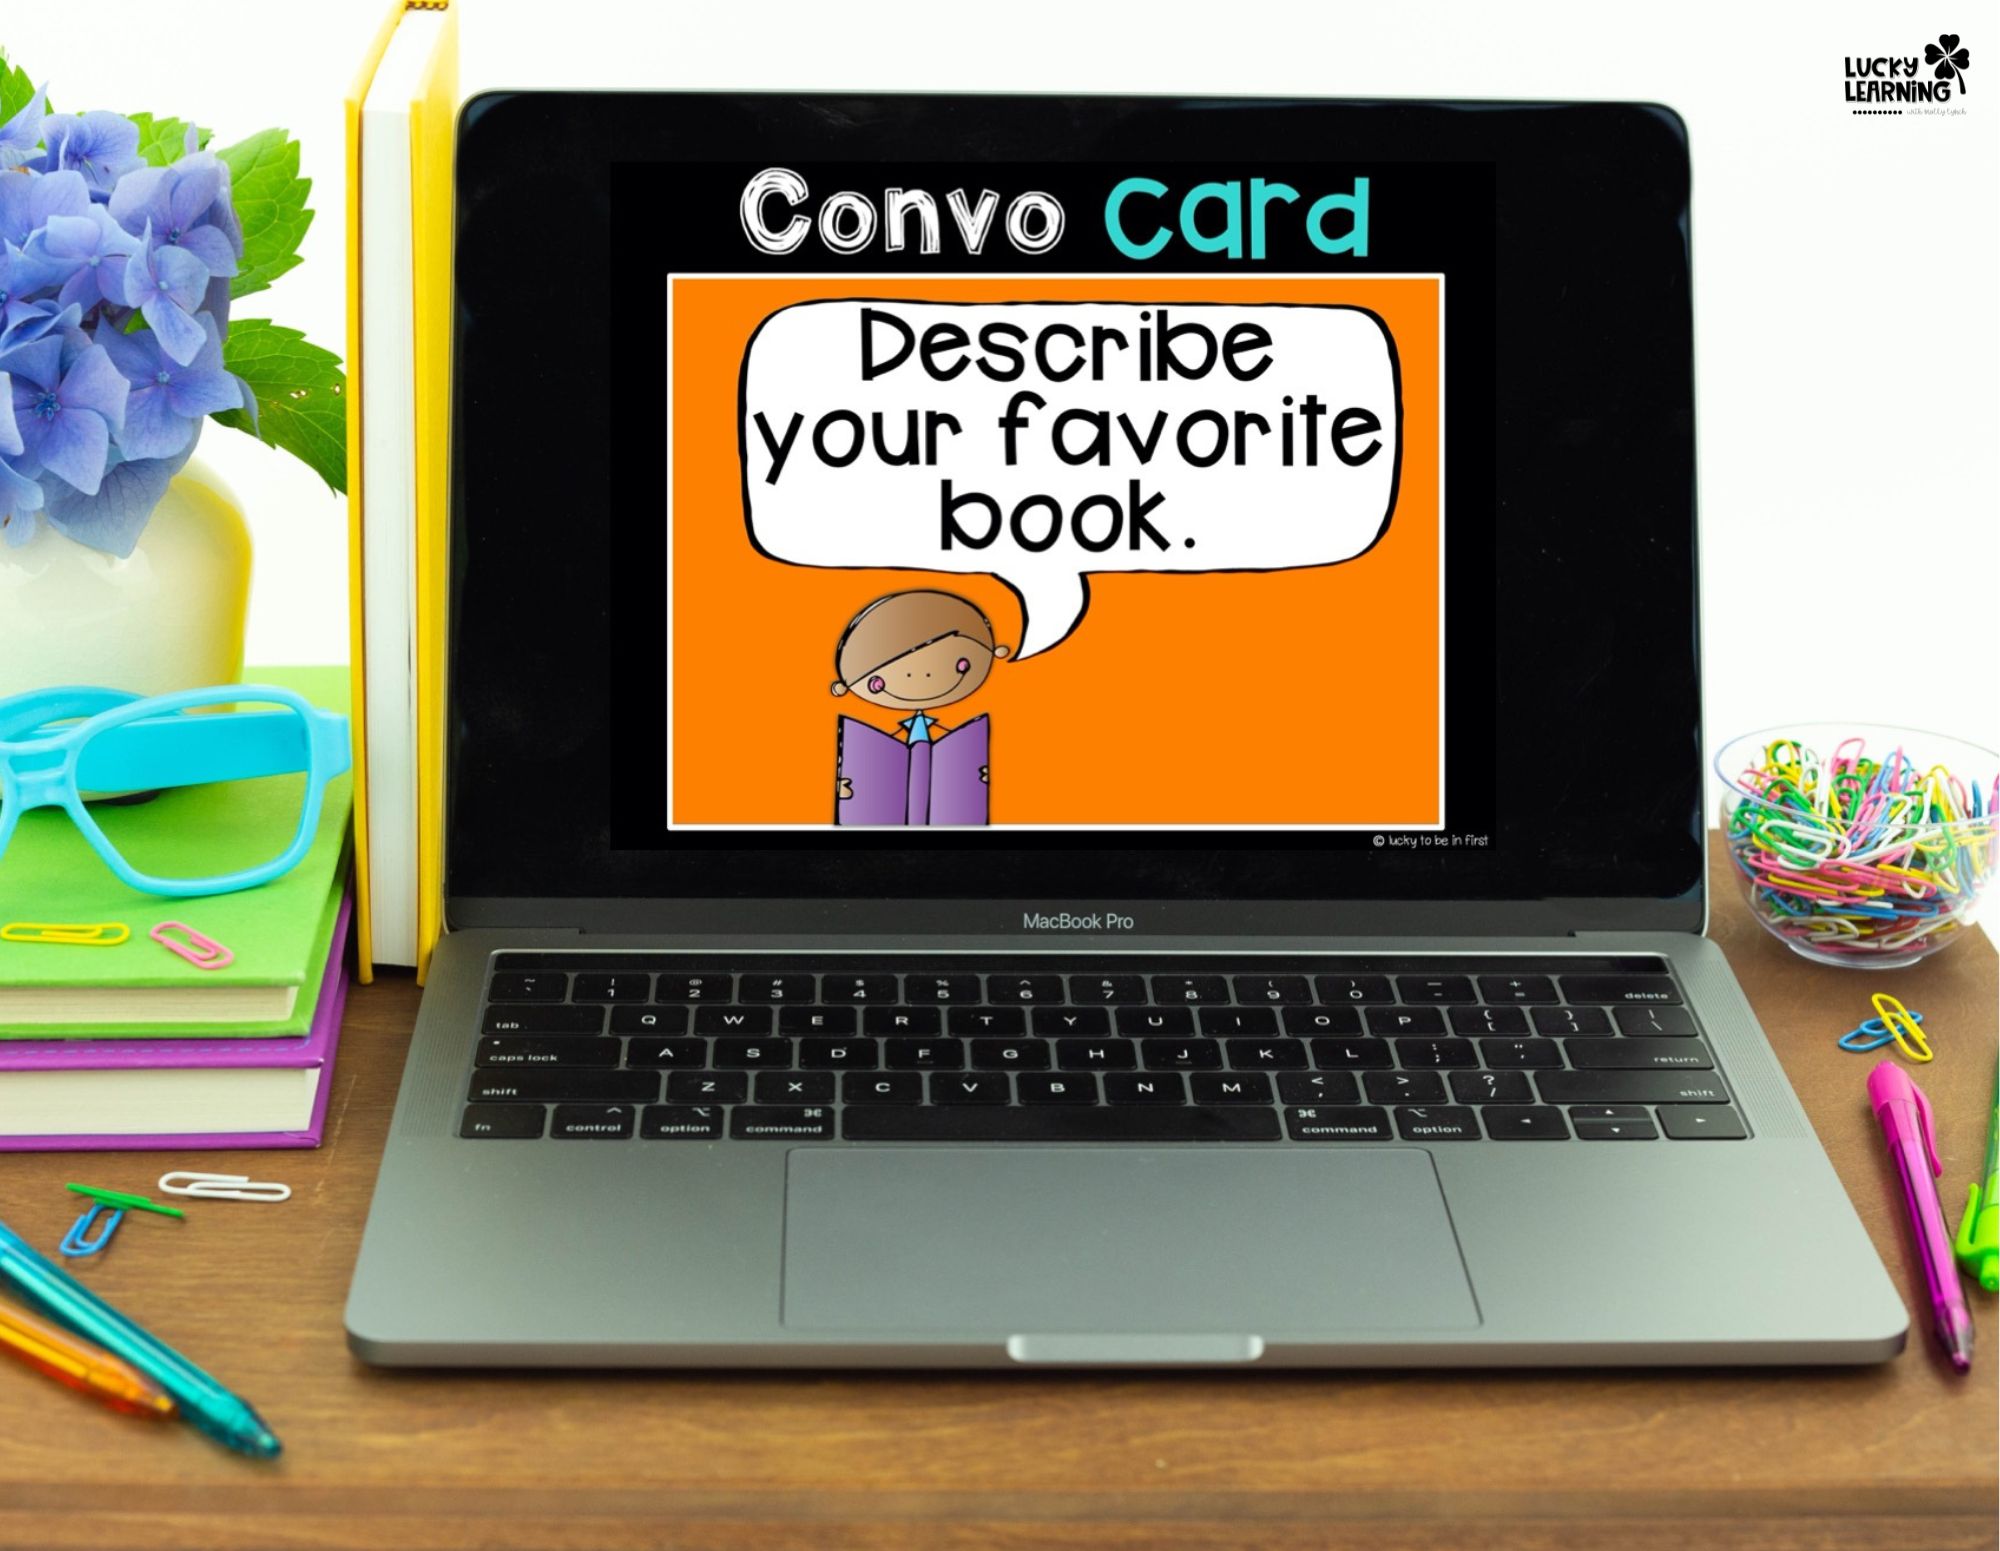 describe your book convo card is an easy sel activity for an elementary classroom | Lucky Learning with Molly Lynch